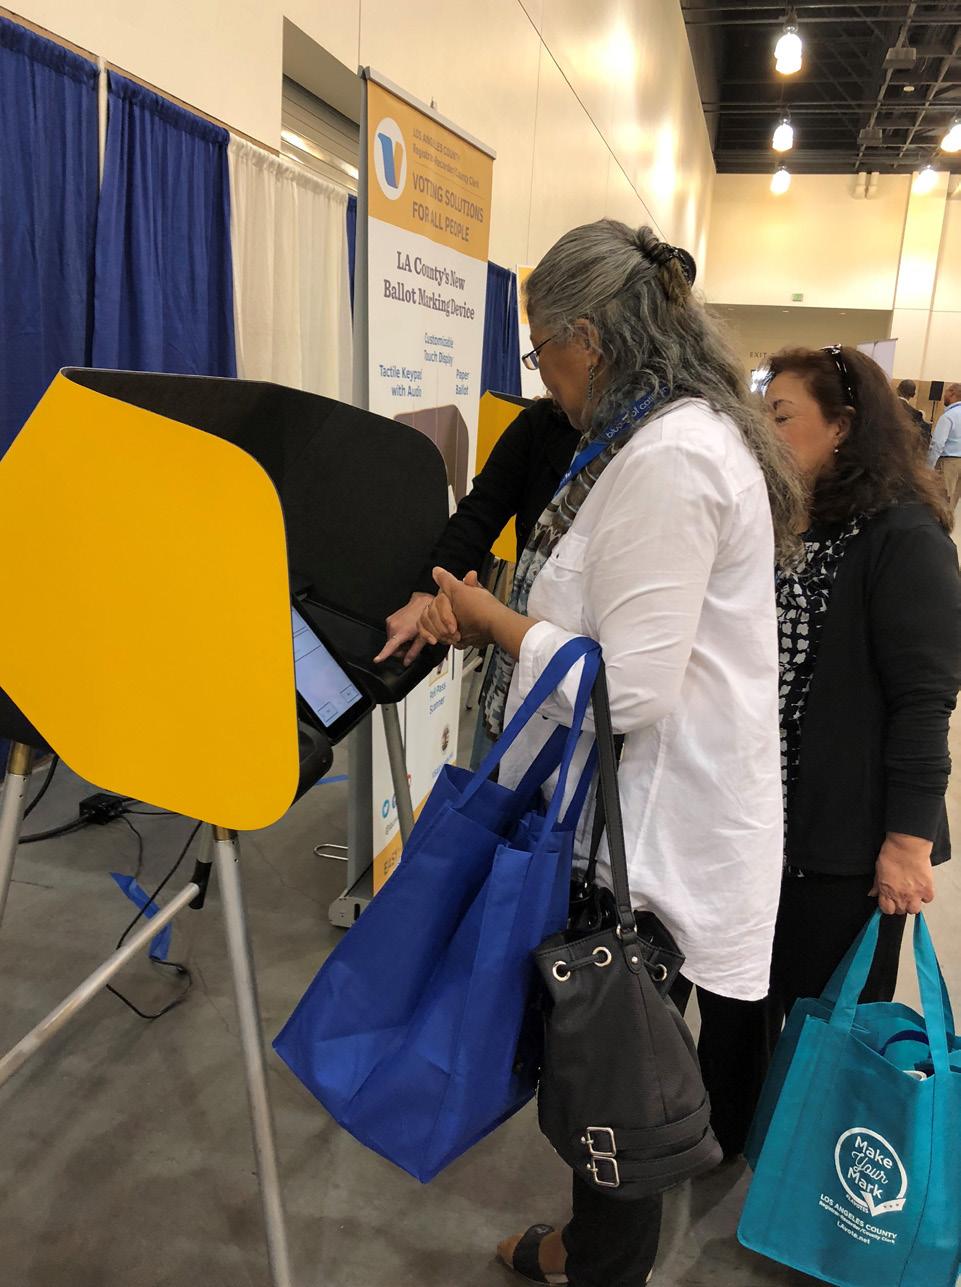 The VSAP Team provided an overview of the future voting experience, which included a demonstration of the Ballot Marking Device (BMD) and were on hand to assist interested individuals to register to